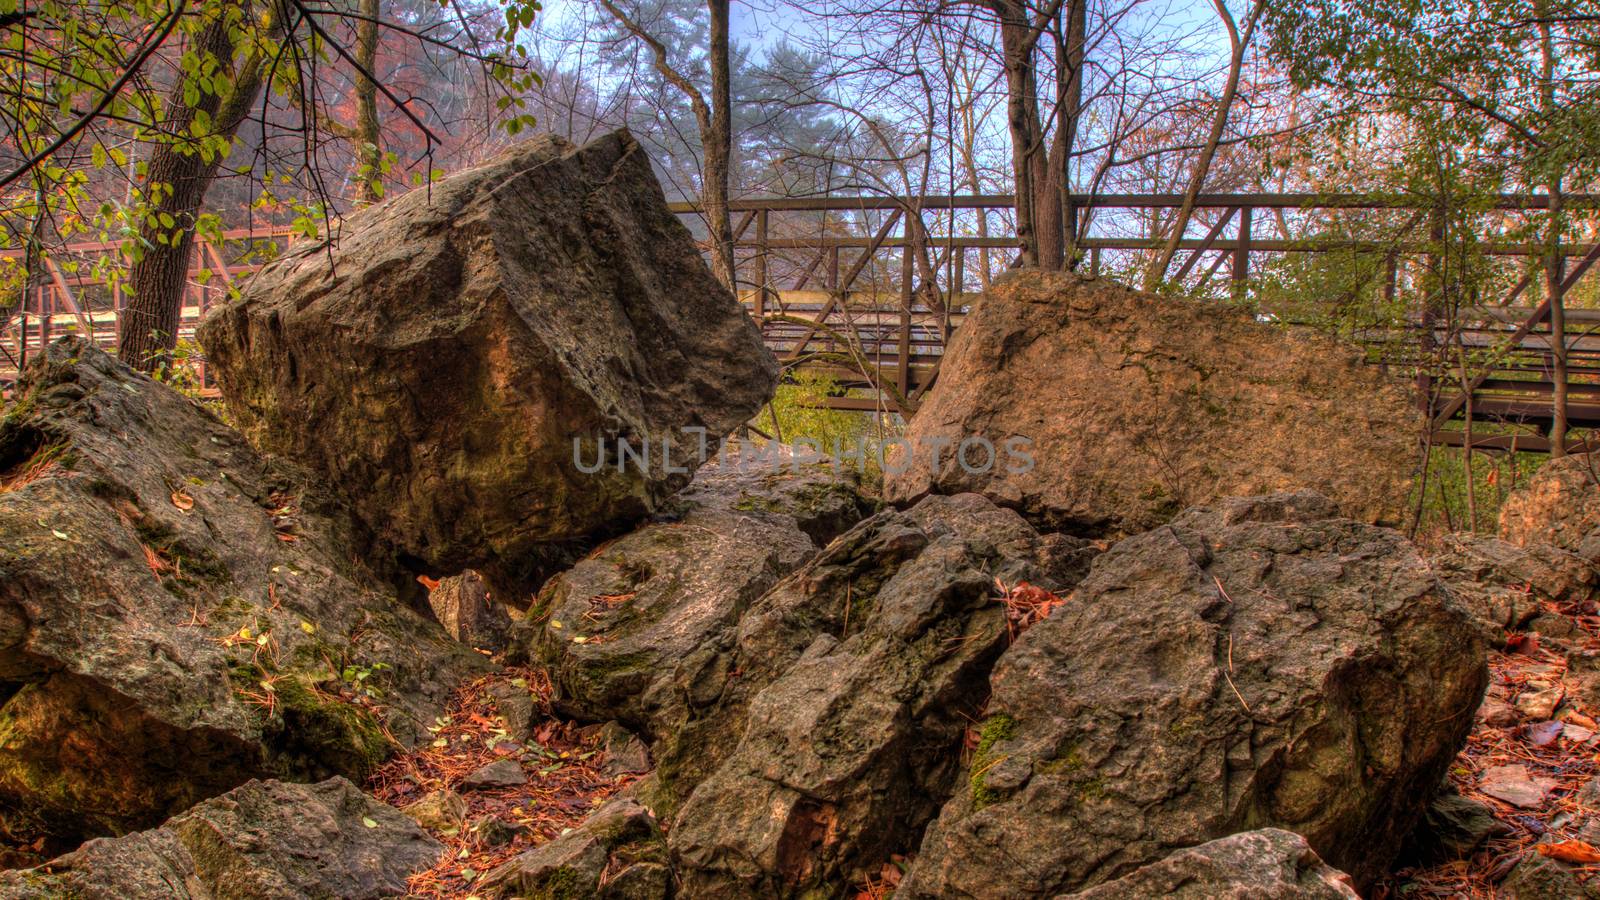 Rocks and Bridge in HDR Fall colors. by Coffee999